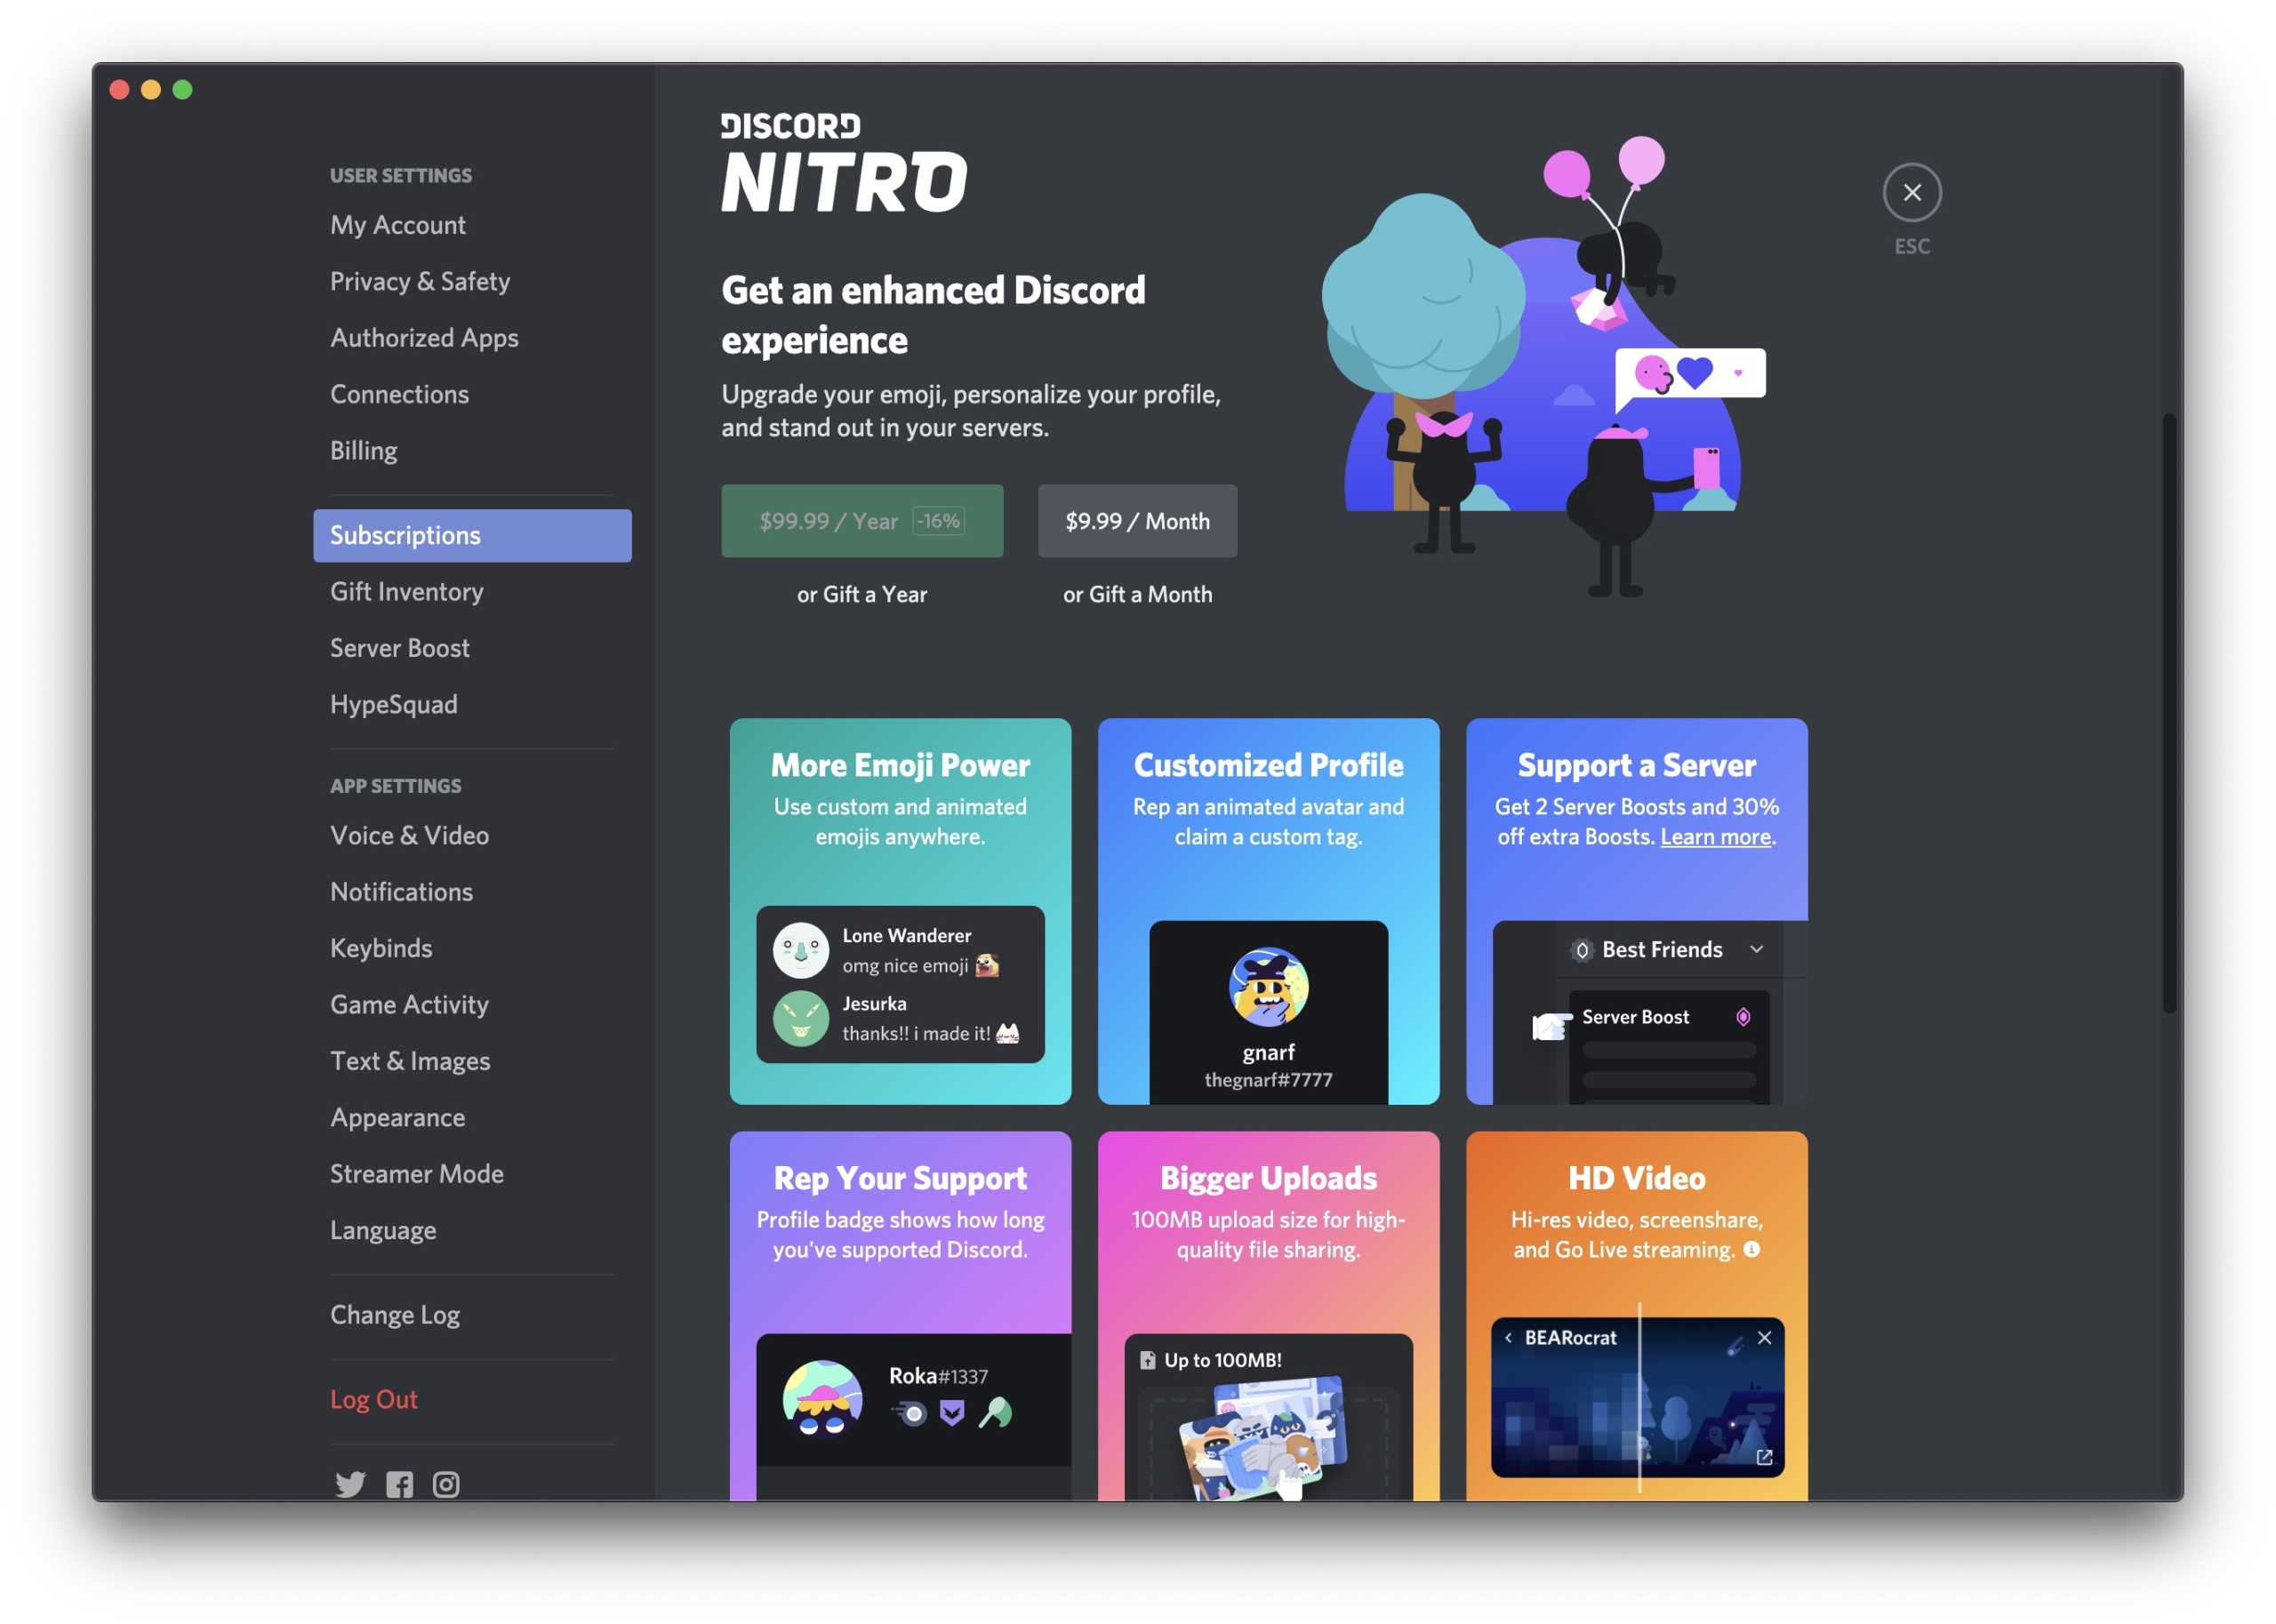 How to Get the Free Discord Nitro Promo in Marvel Snap